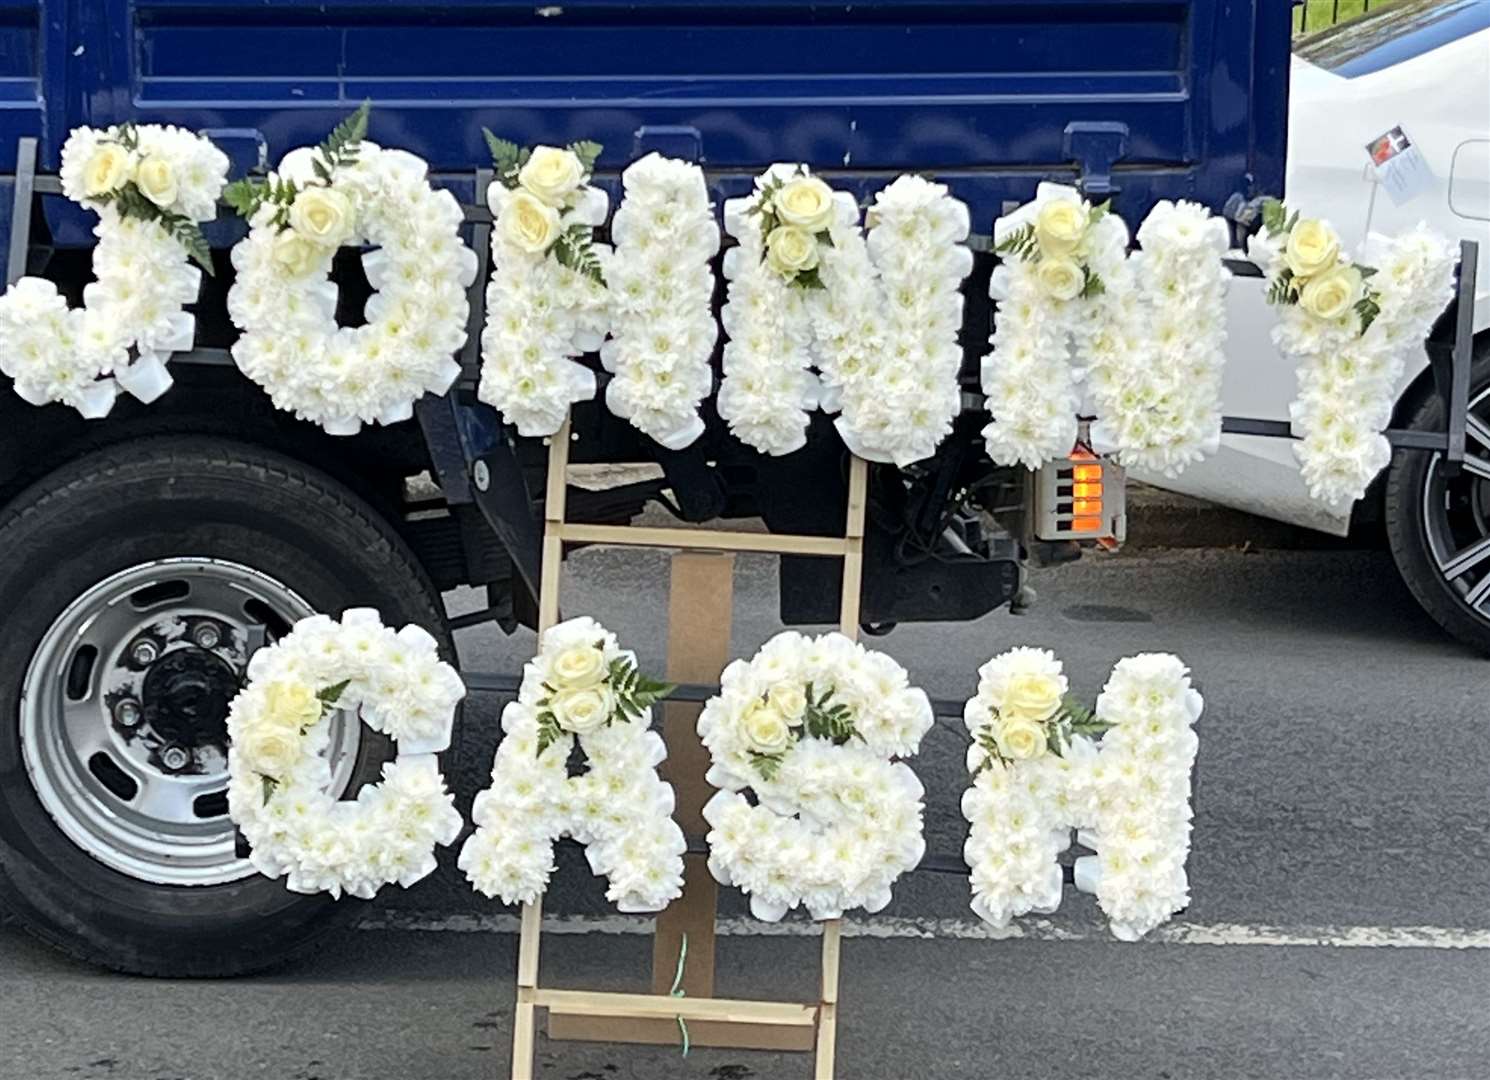 Flowers displaying Johnny Cash's name were on display to mark the sad occasion. Picture: Barry Goodwin